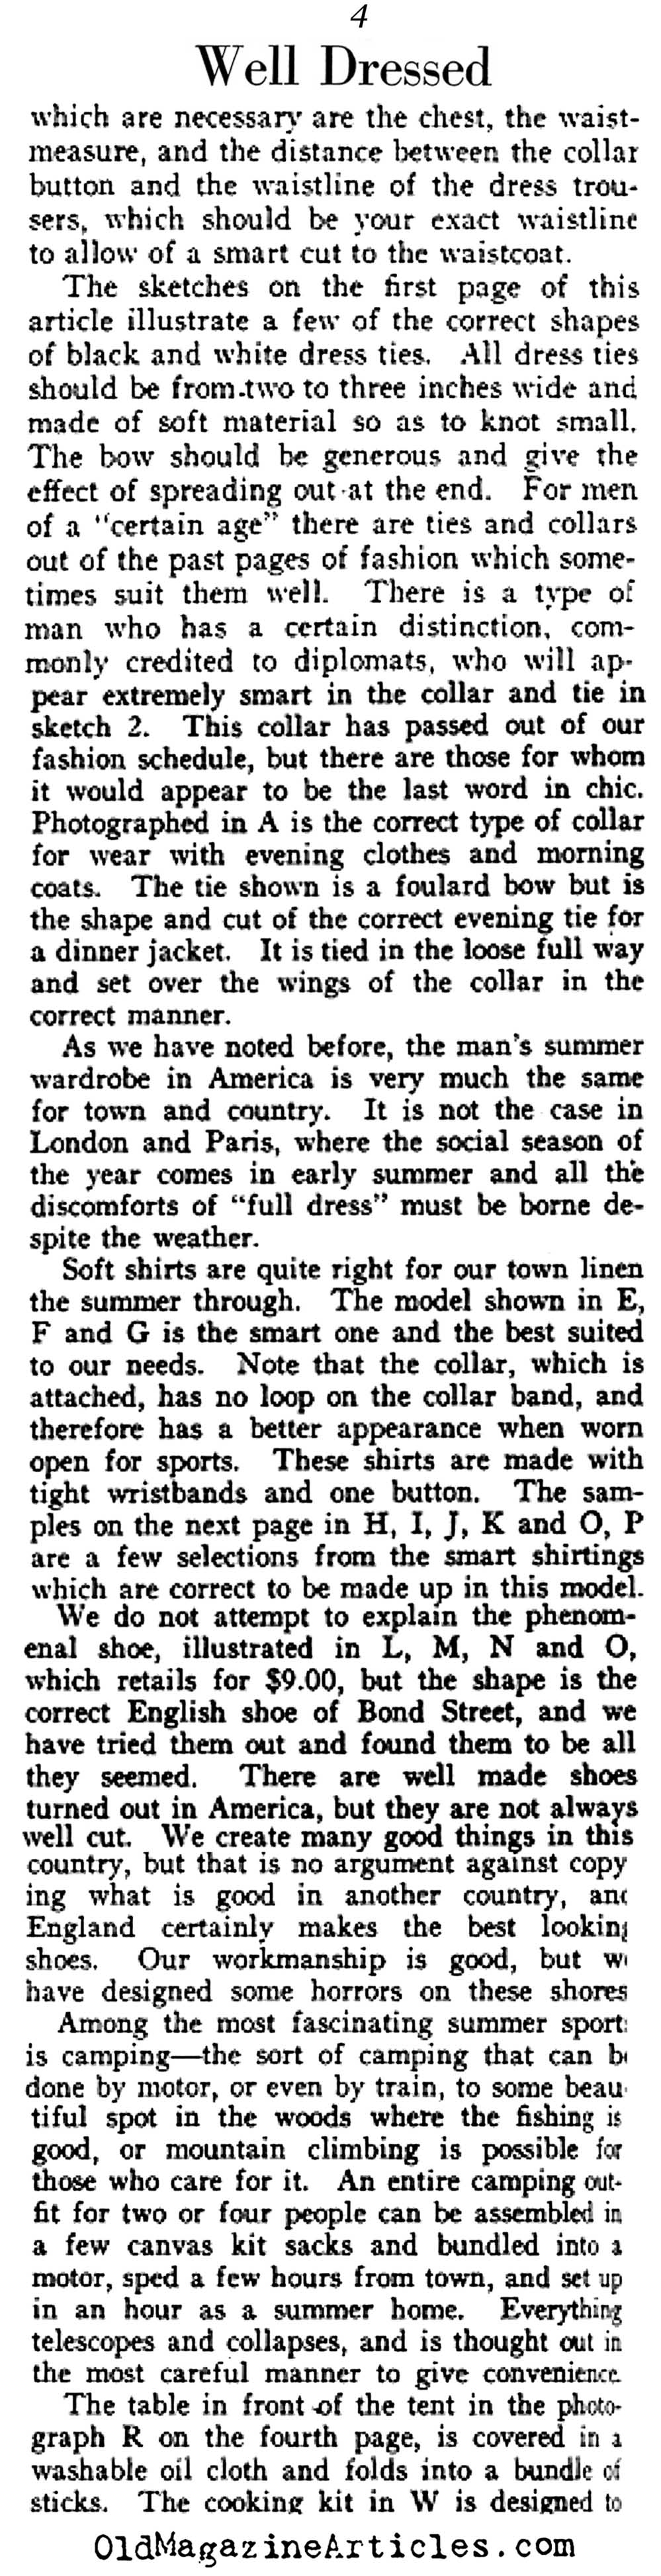 Much Talk of White Waistcoats, Shoes and Shirts  (Vanity Fair Magazine, 1921)